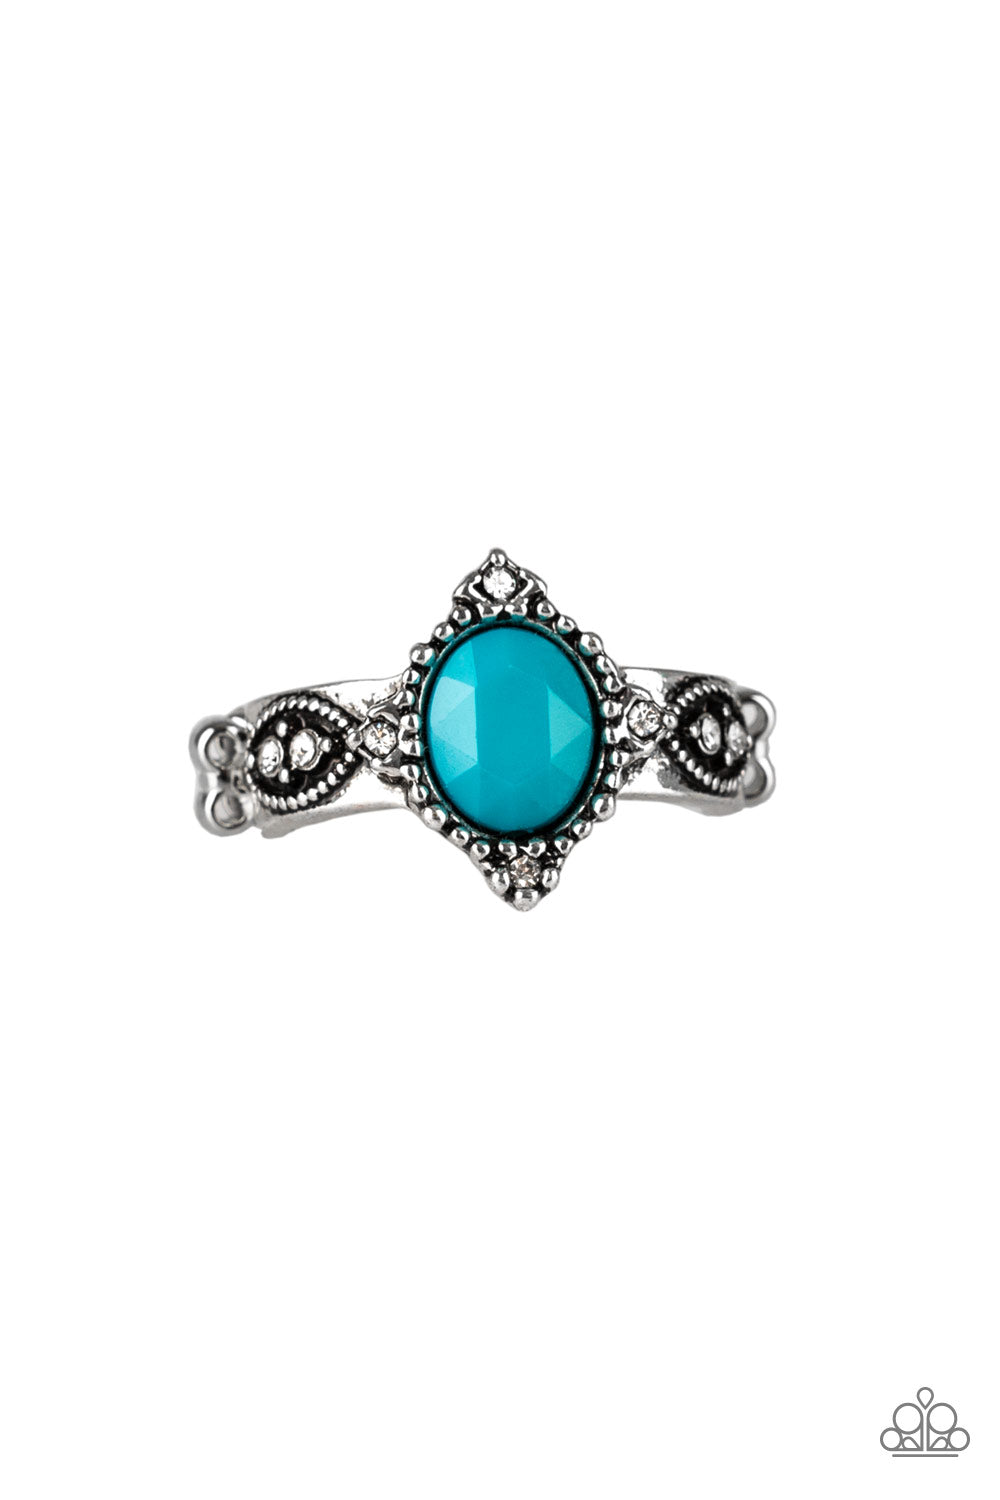 Pricelessly Princess - Blue and Silver Ring - Paparazzi Accessories - A faceted blue bead is pressed into an ornate silver band radiating with silver studs and dainty white rhinestones for a refined look. Features a dainty stretchy band for a flexible fit. Sold as one individual ring.